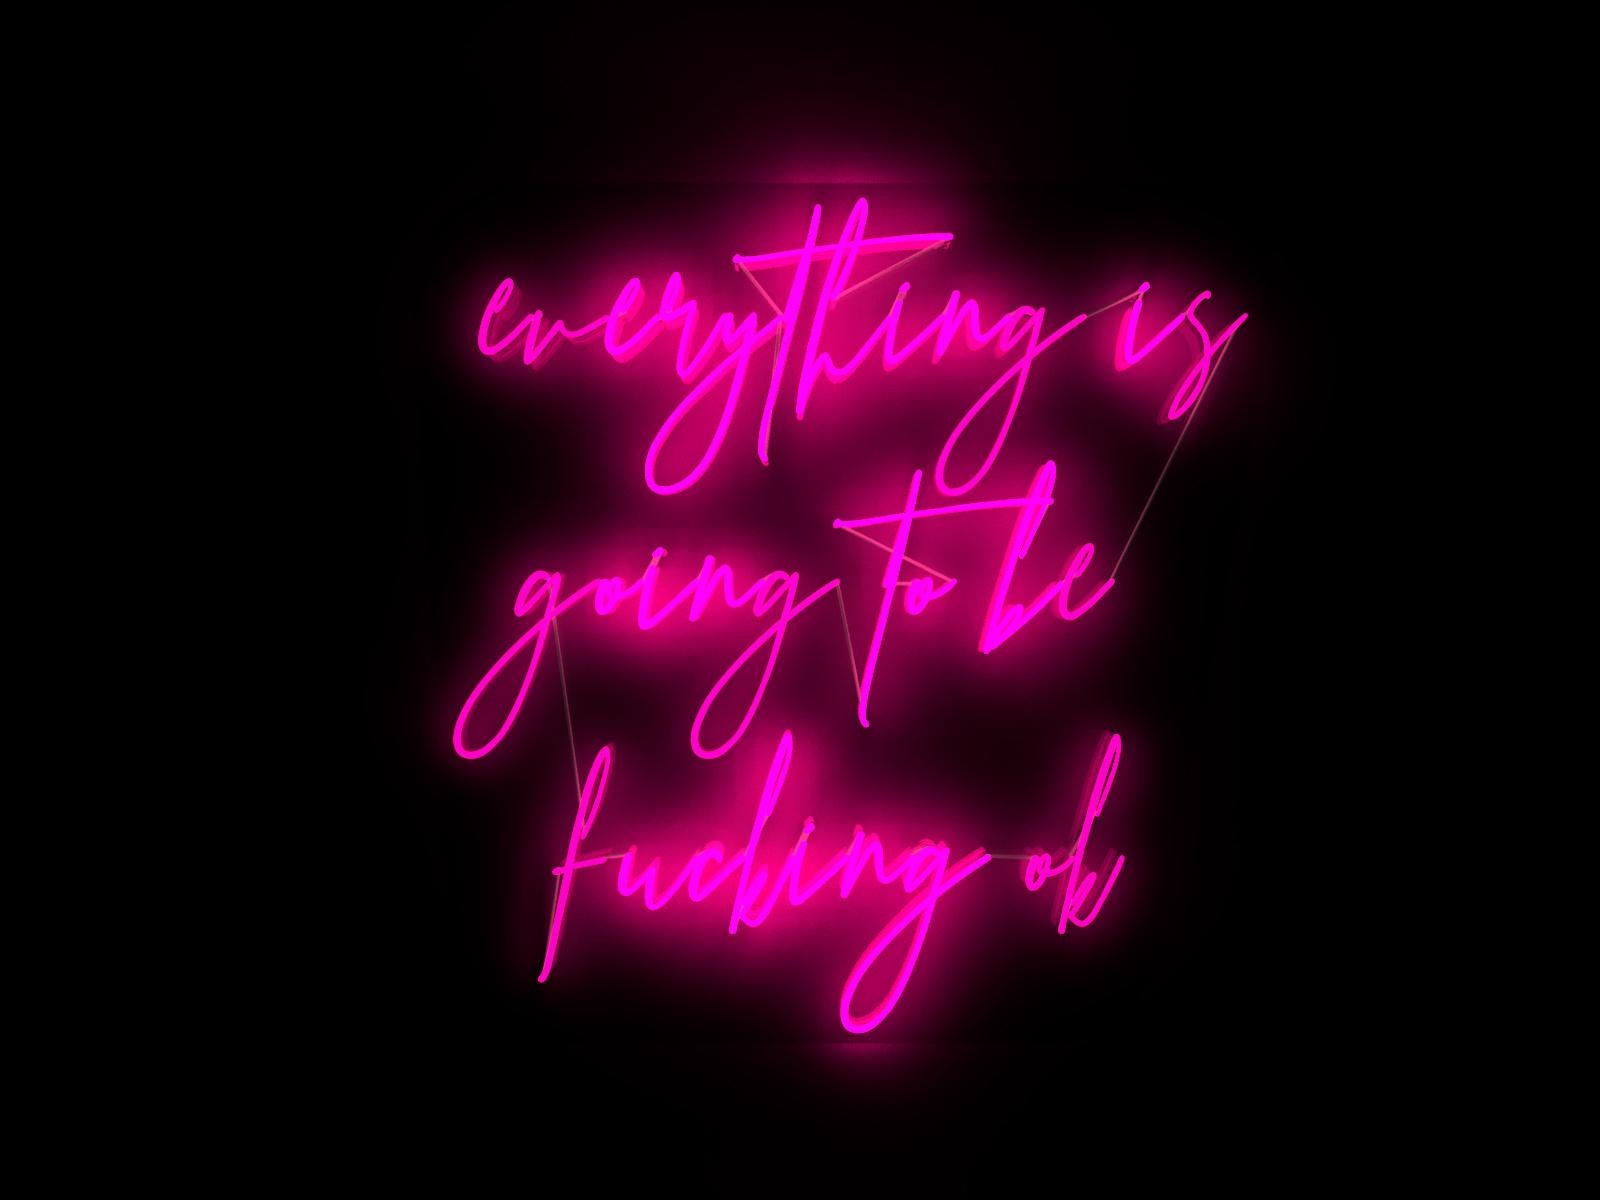 Mary Jo McGonagle Figurative Sculpture - Everything is going to be fucking ok  - neon art work